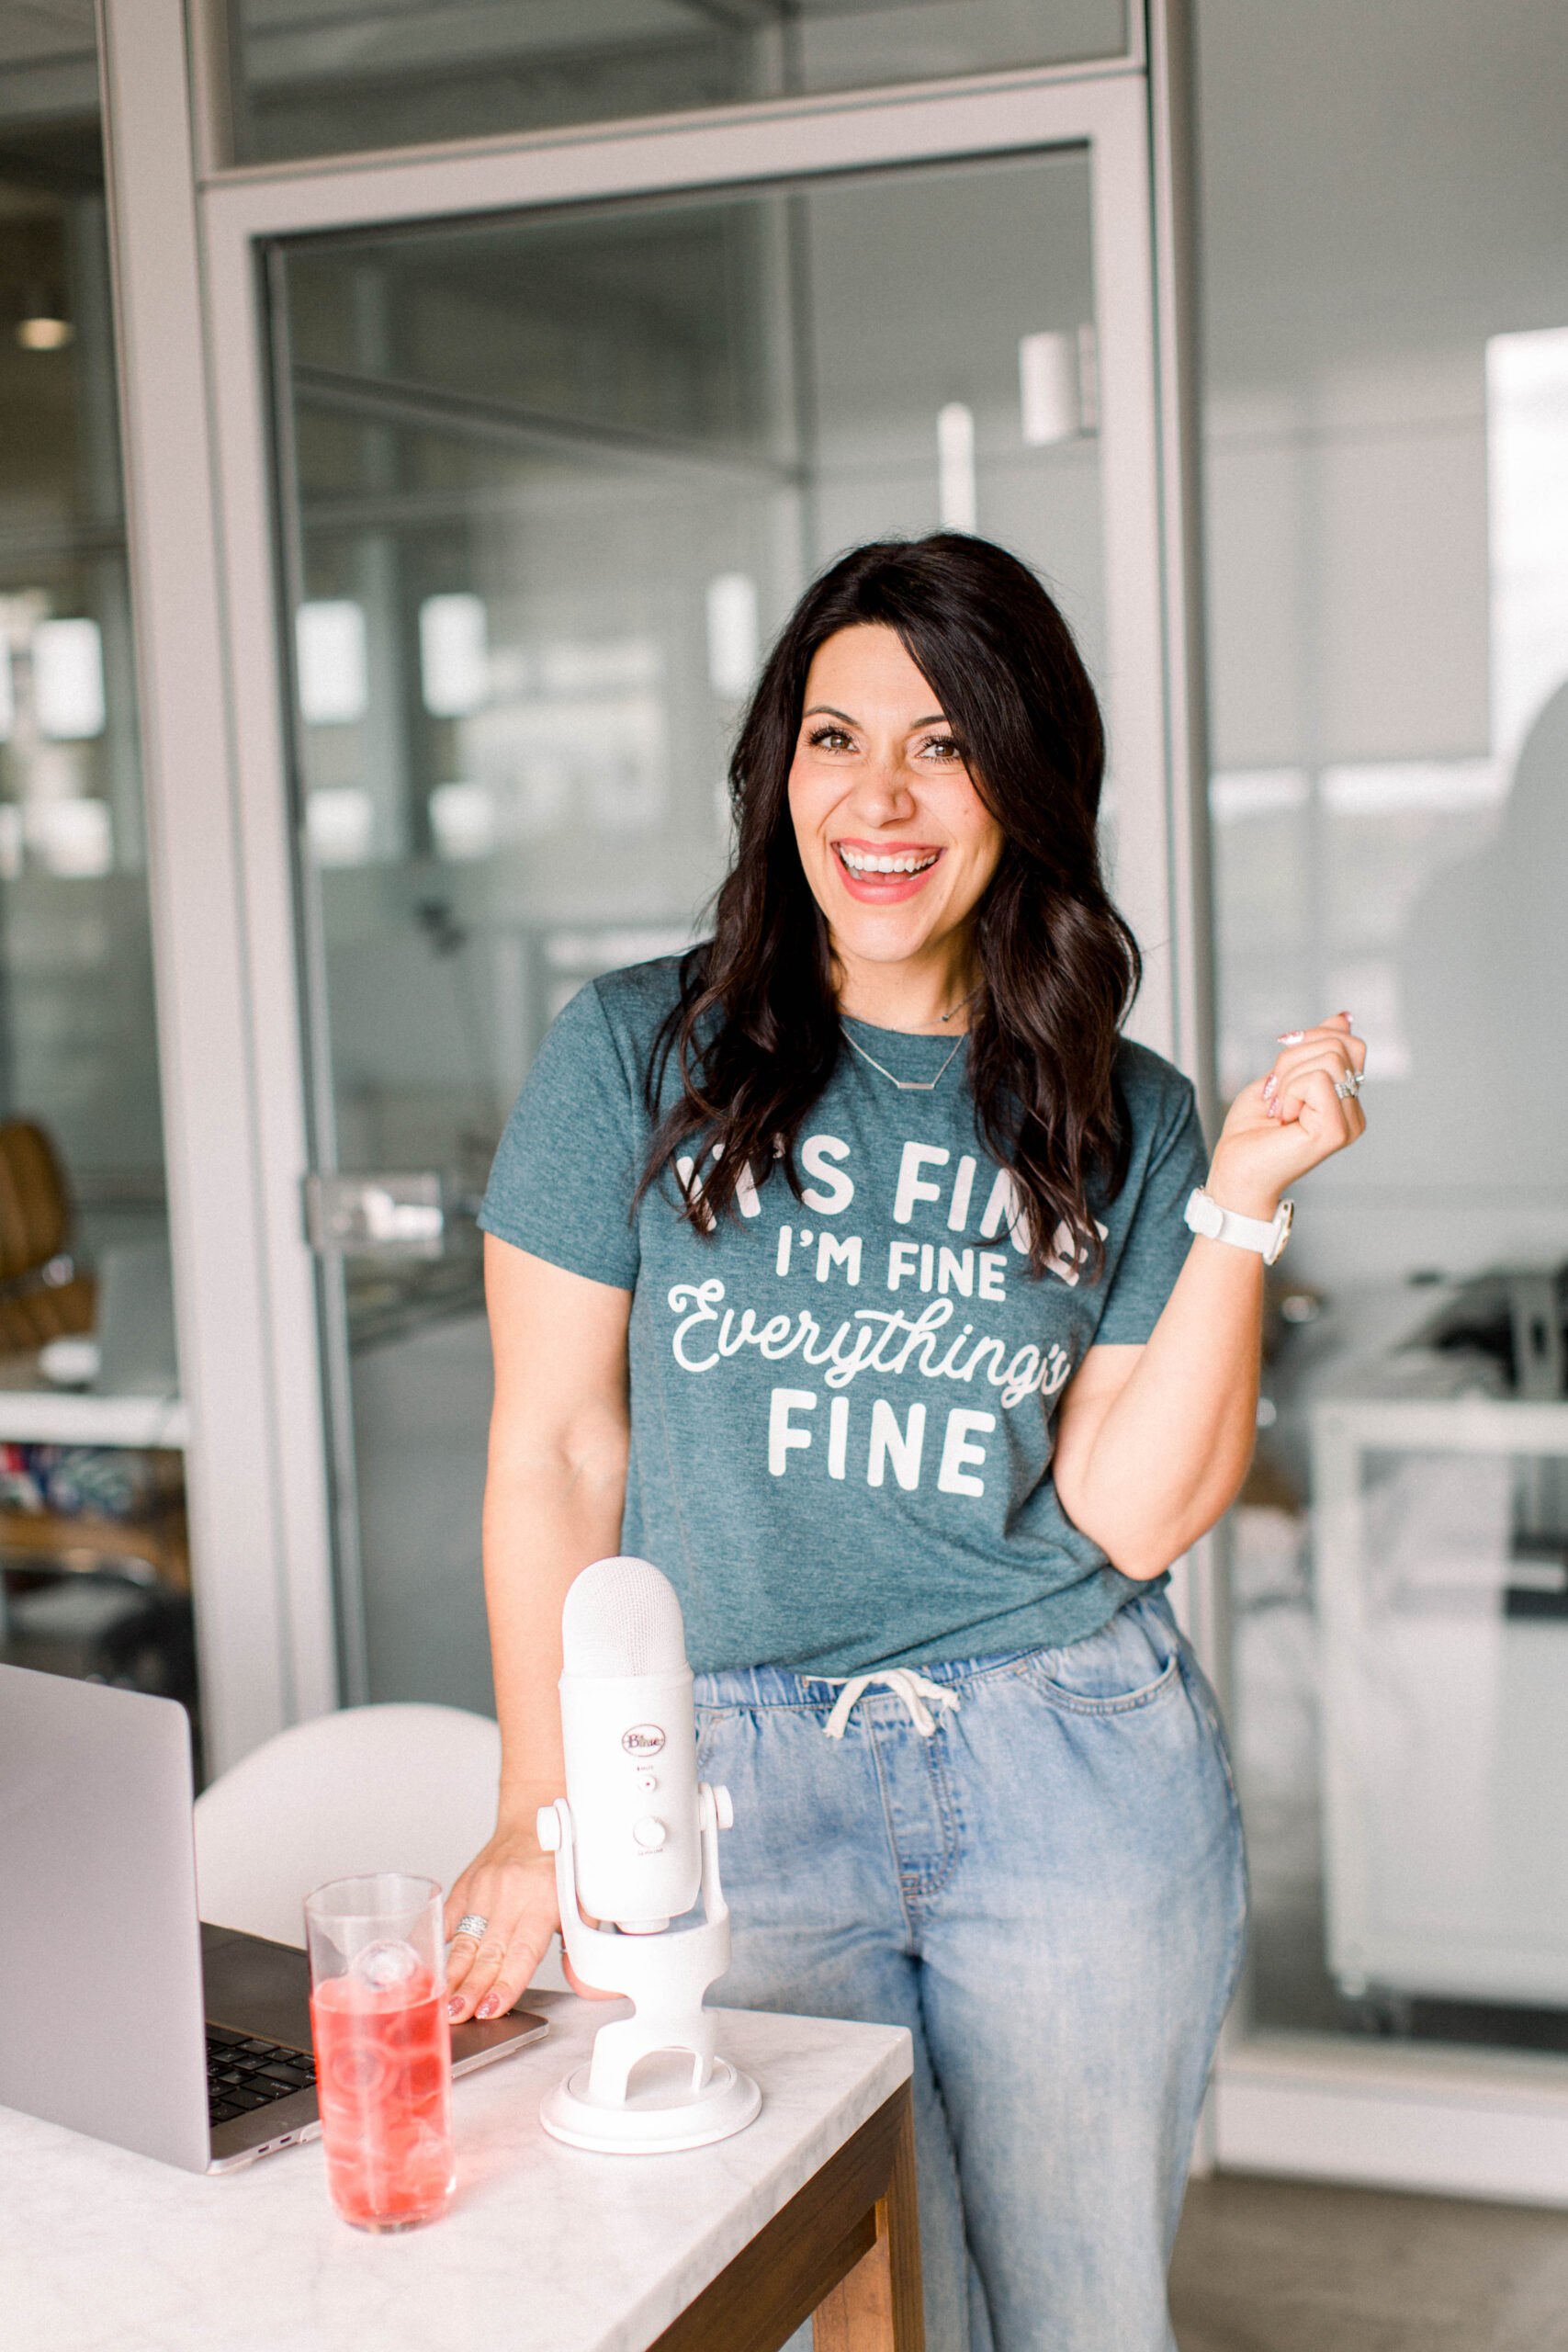 dark haired woman in a green shirt and blue jeans, is standing in front of a glass wall with a table in front of her. on the table is a laptop, white microphone, and a glass of juice. She is smiling at the camera.